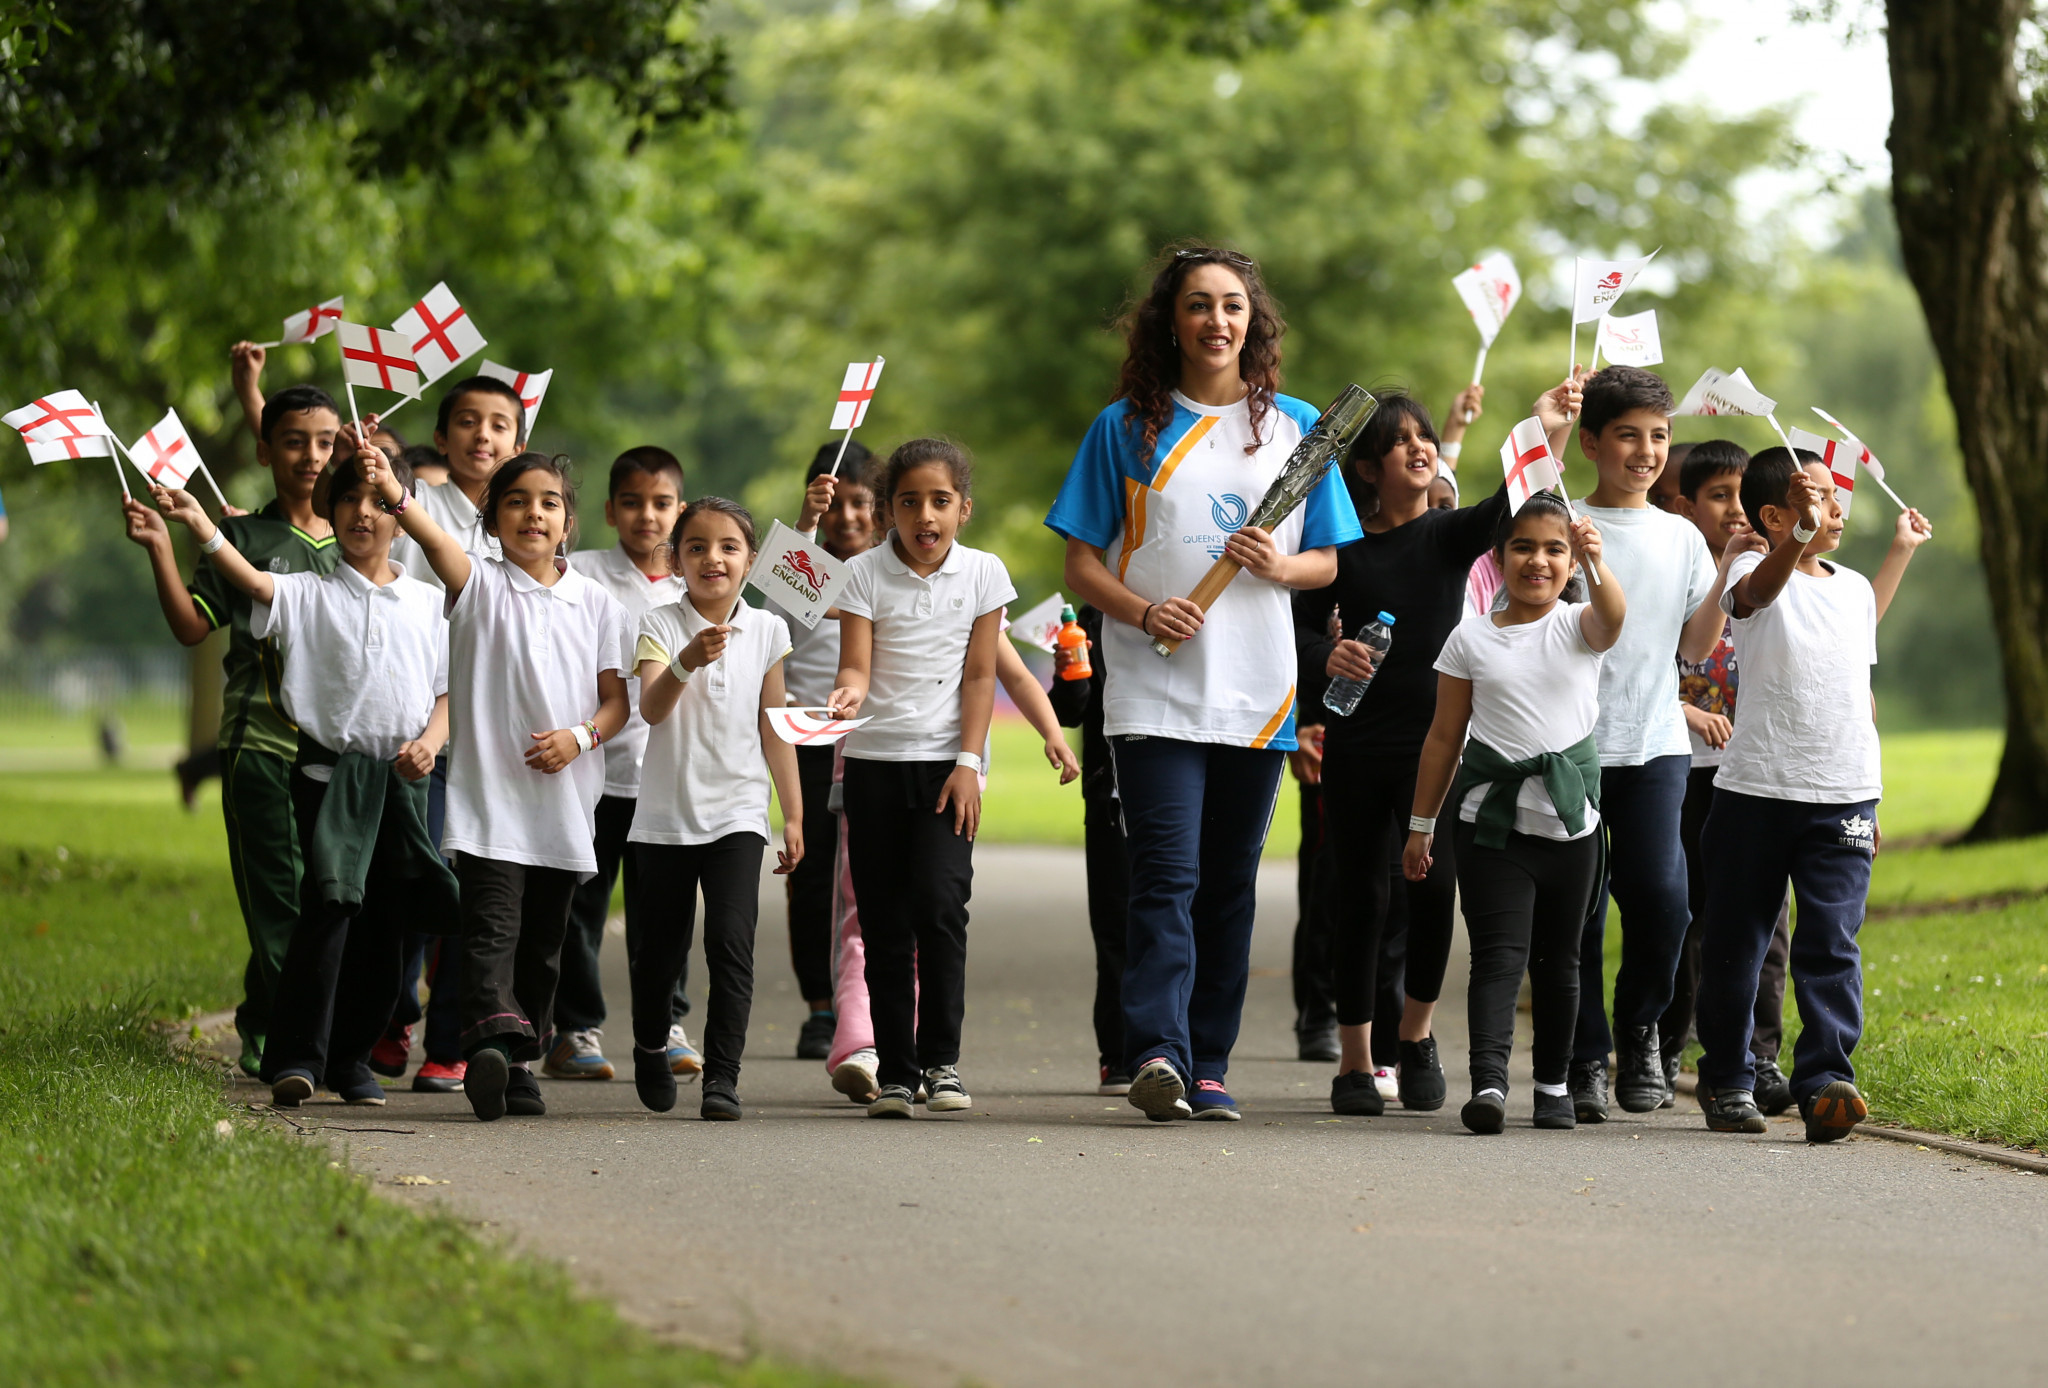 Mimi Cesar was joined by schoolchildren in carrying the Baton in Birmingham before Glasgow 2014 ©Getty Images